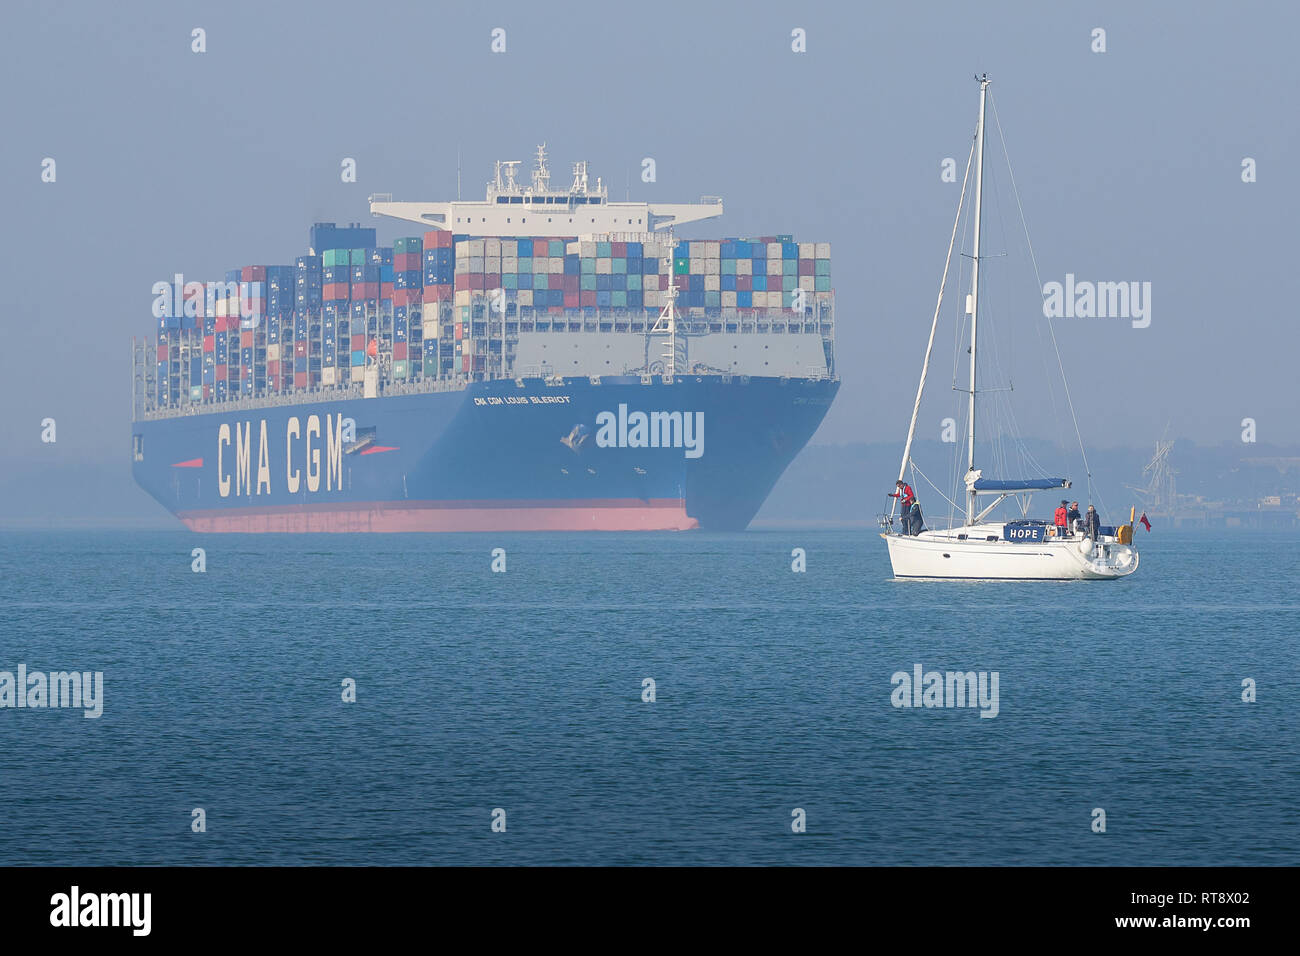 The 400 metre, Ultra-Large Container Ship, CMA CGM LOUIS BLERIOT, Departing The Port Of Southampton, A Small Sailing Boat In The Foreground. UK. Stock Photo